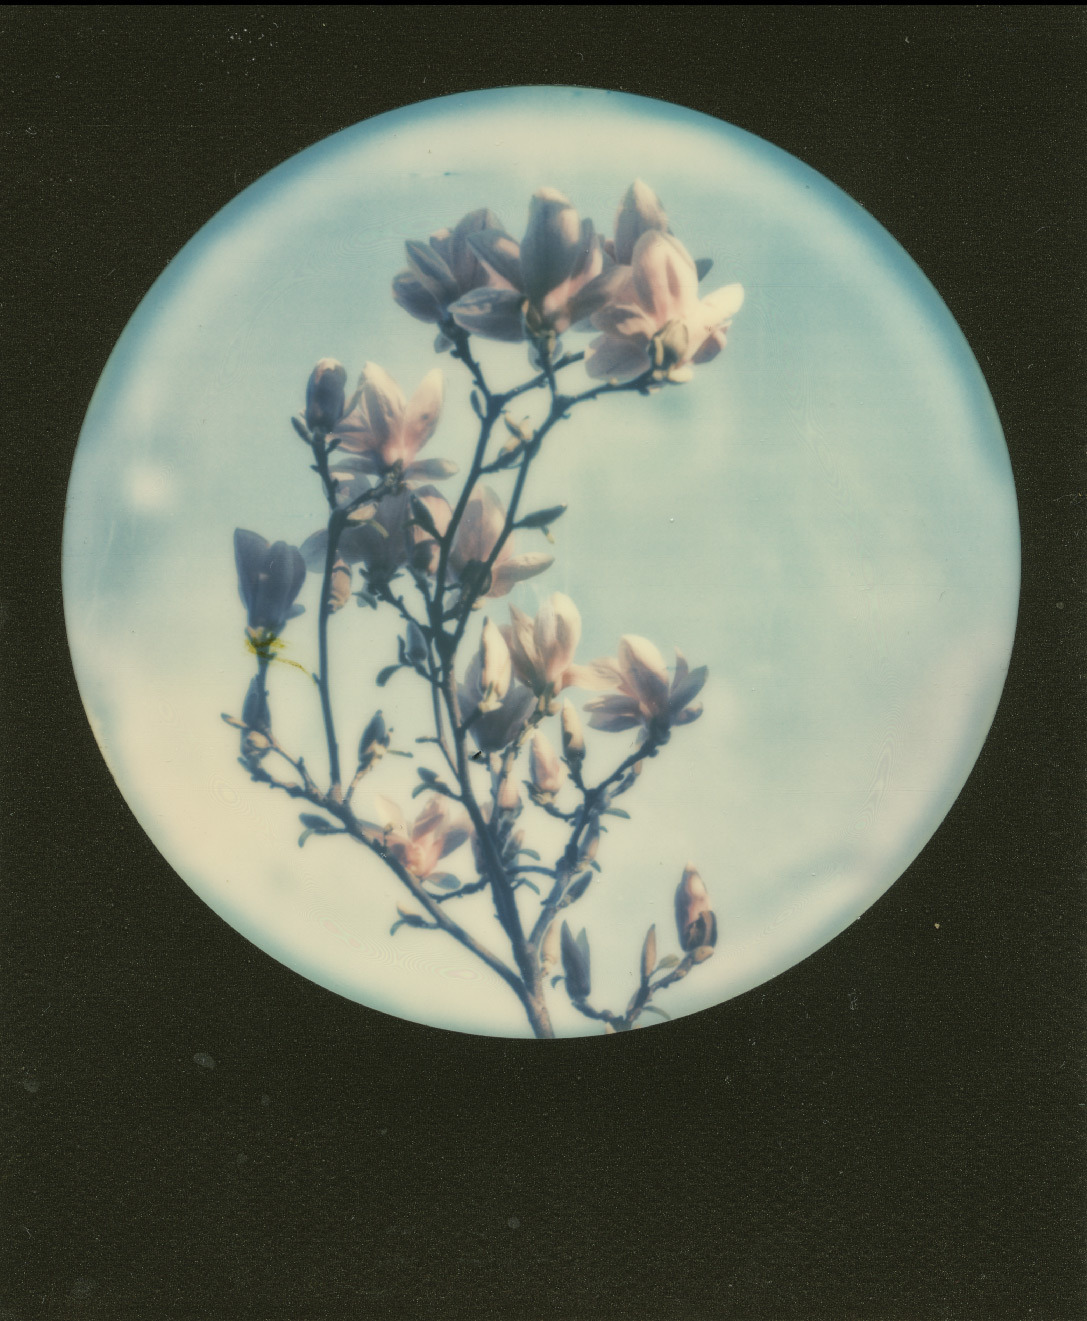 polaroidsandthoughts:
“polaroidsandthoughts:
“Magnolia
”
from the archive
”